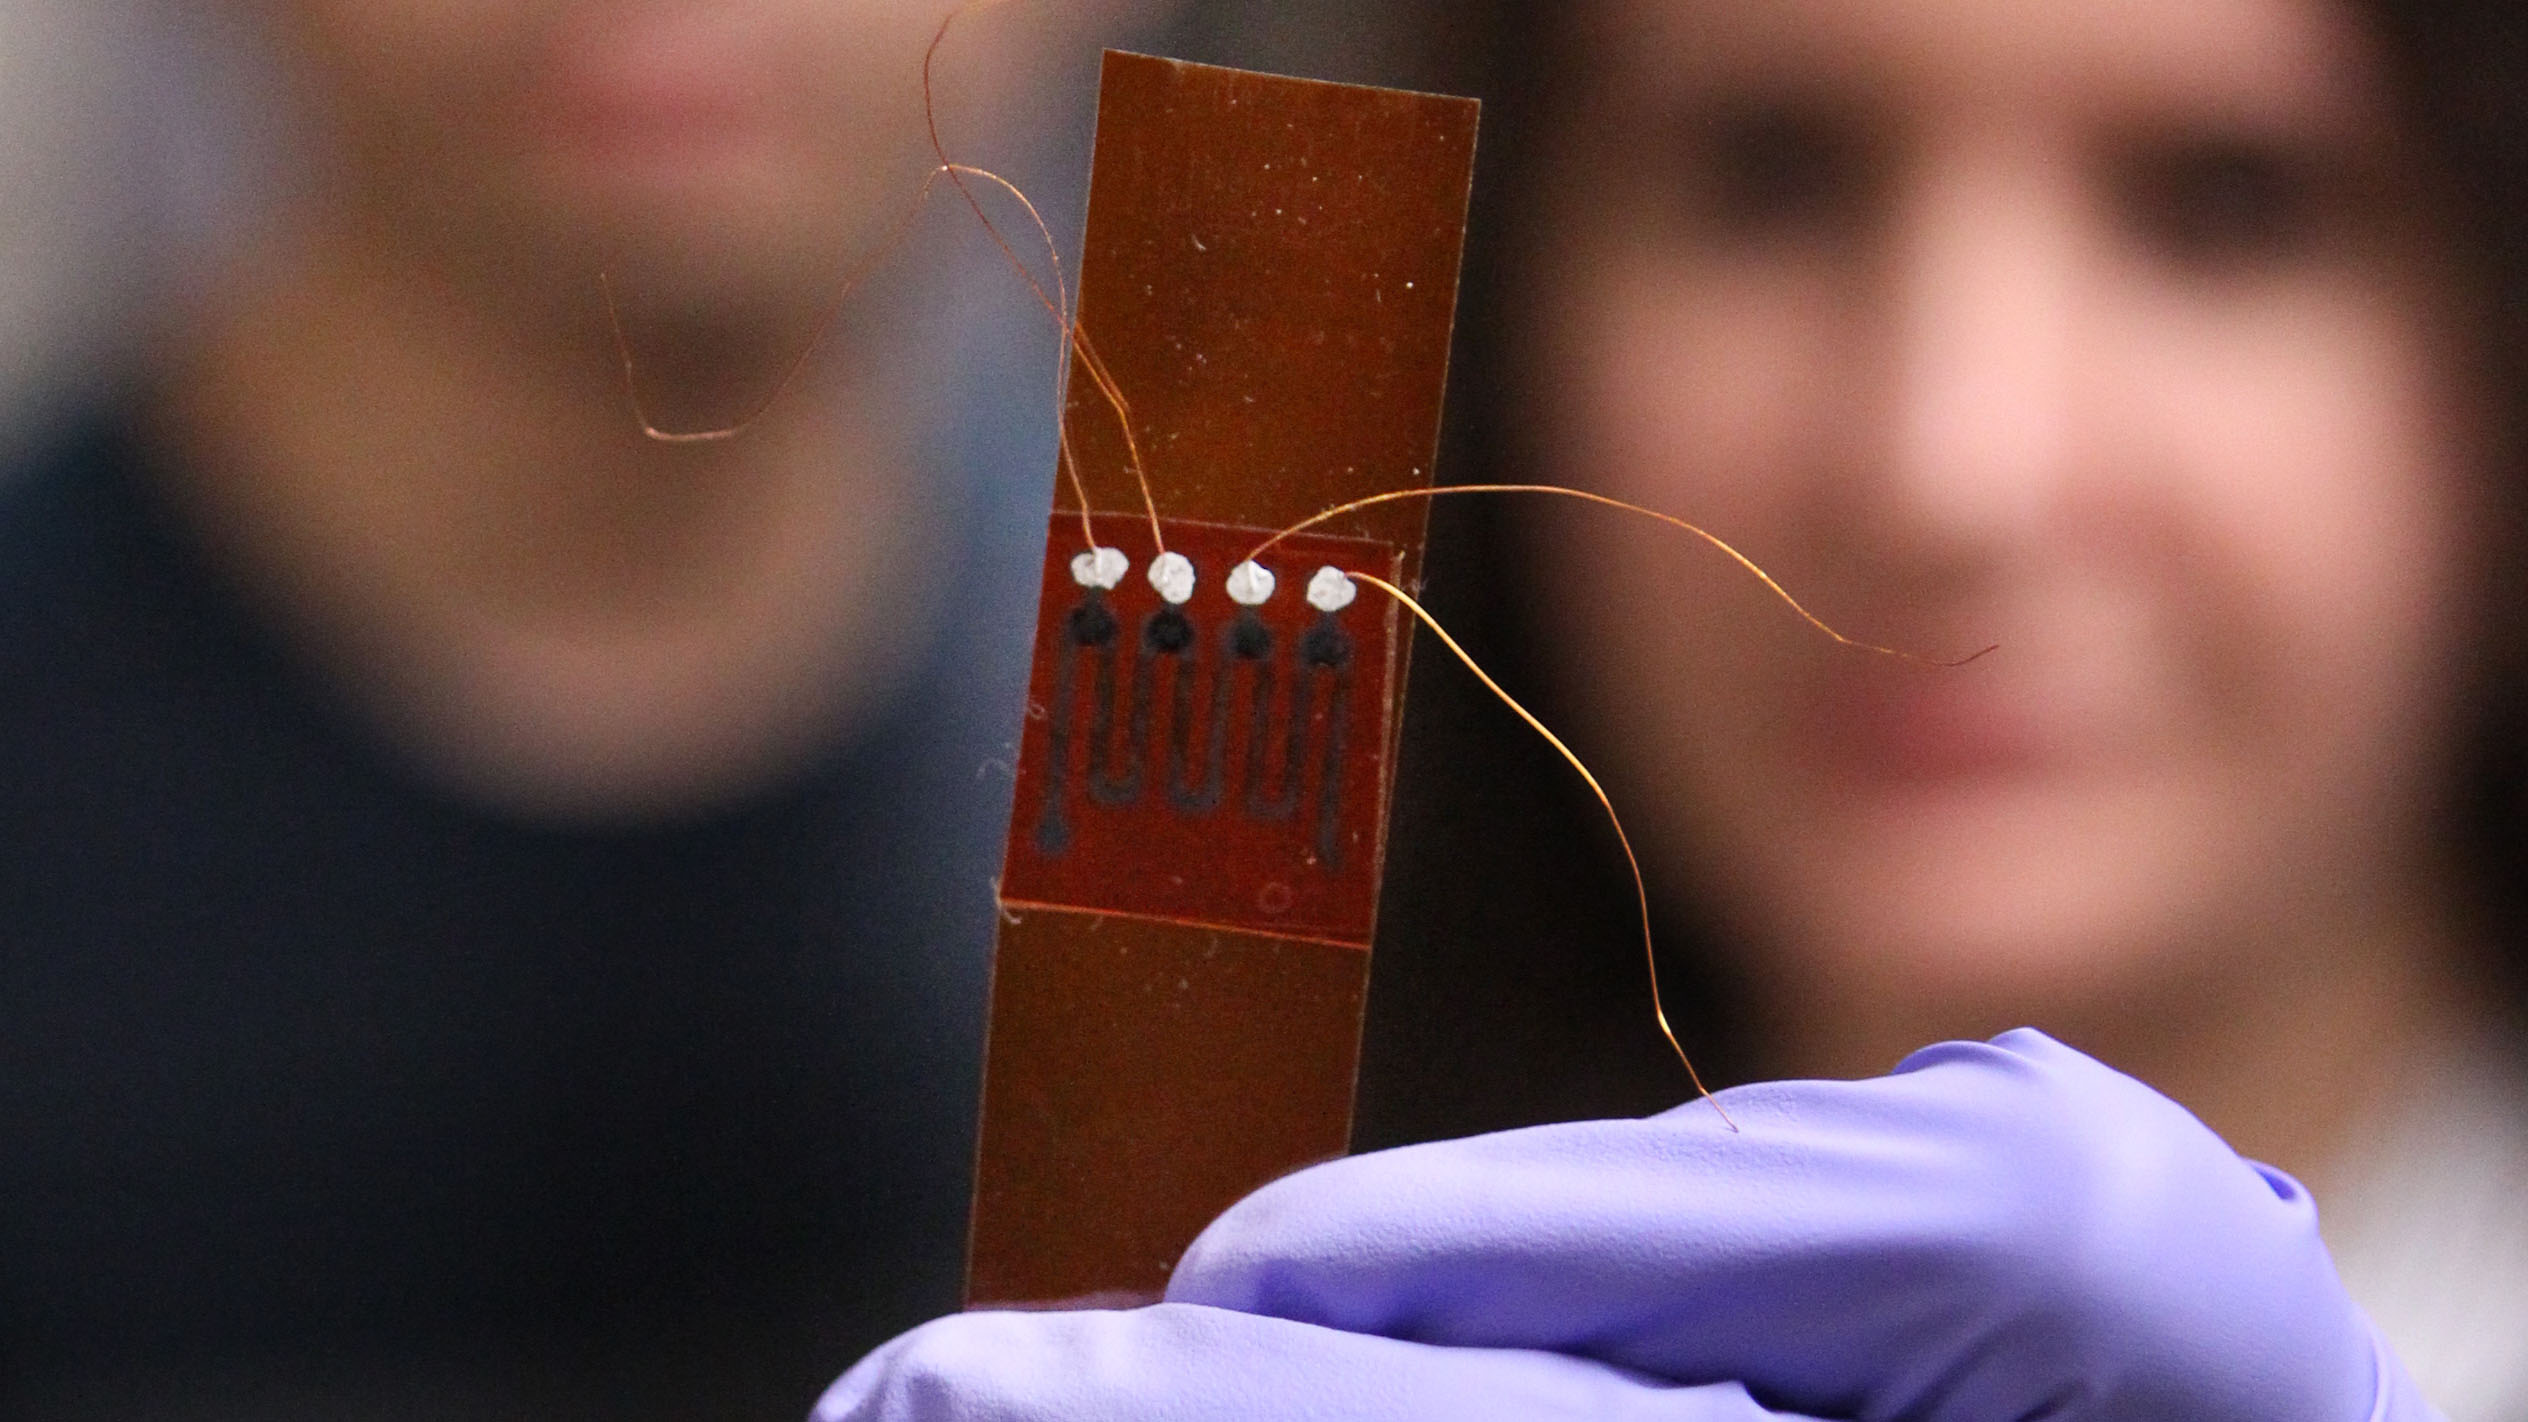 Researchers, out of focus, hold photovoltaic device close to the camera.